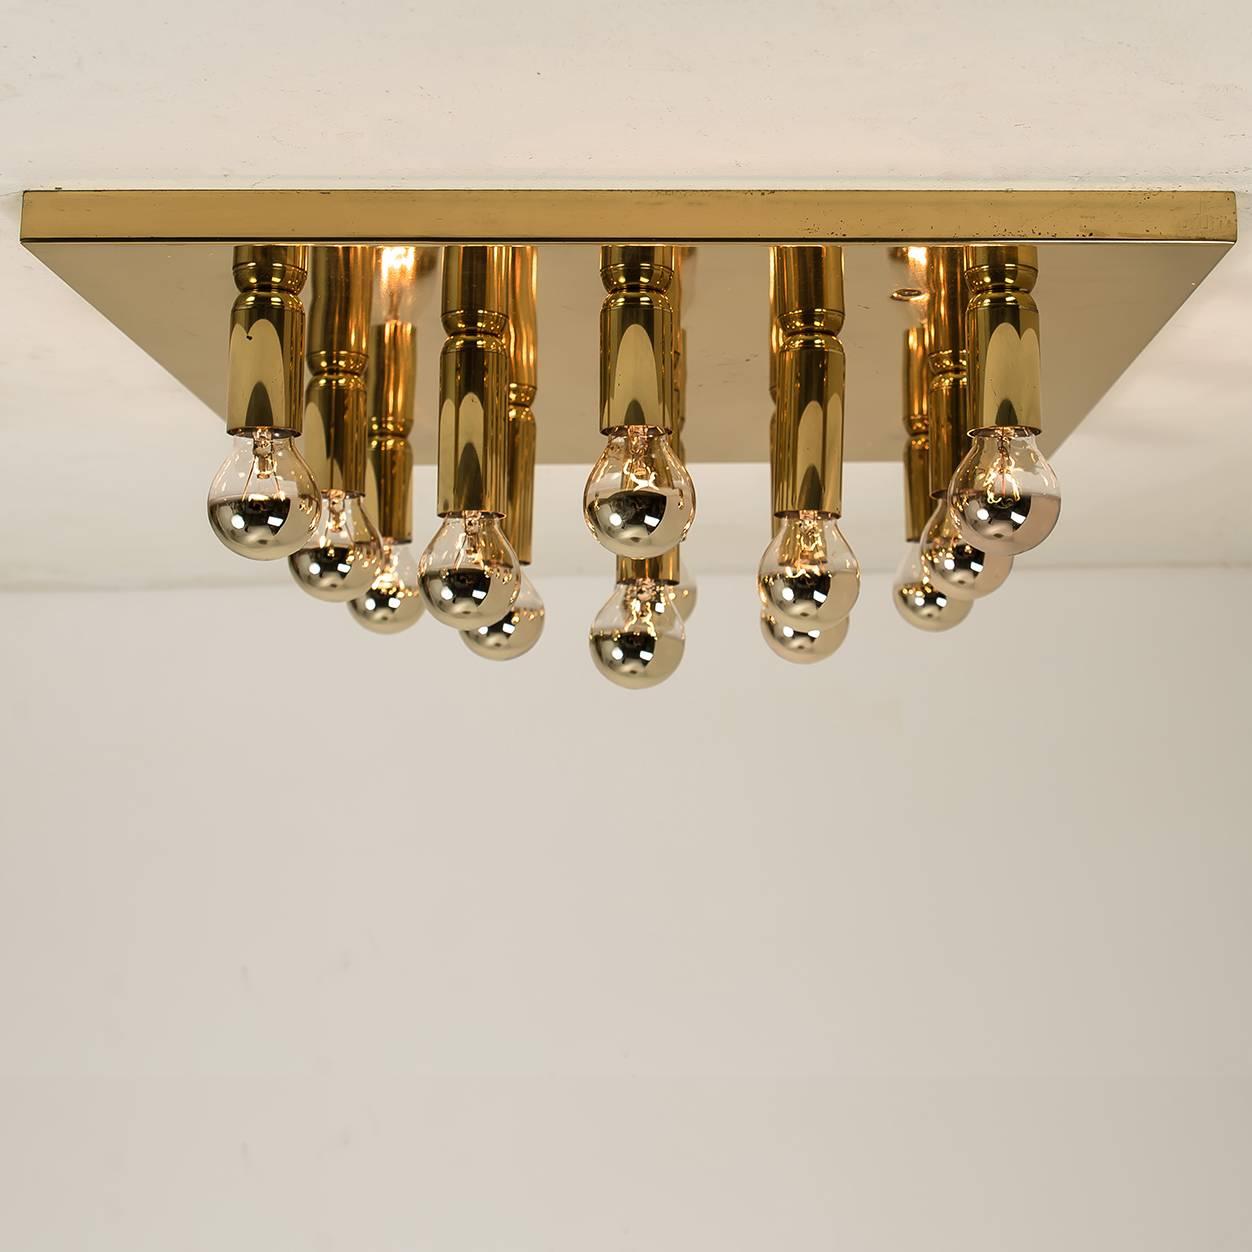 A Sciolari style geometric sculptural flush mount chandelier. Simple and beautiful.
Can also work for impressive wall light. The timeless modern elegance of this flush mount is sure to lend a special atmosphere in every home.

Three pieces